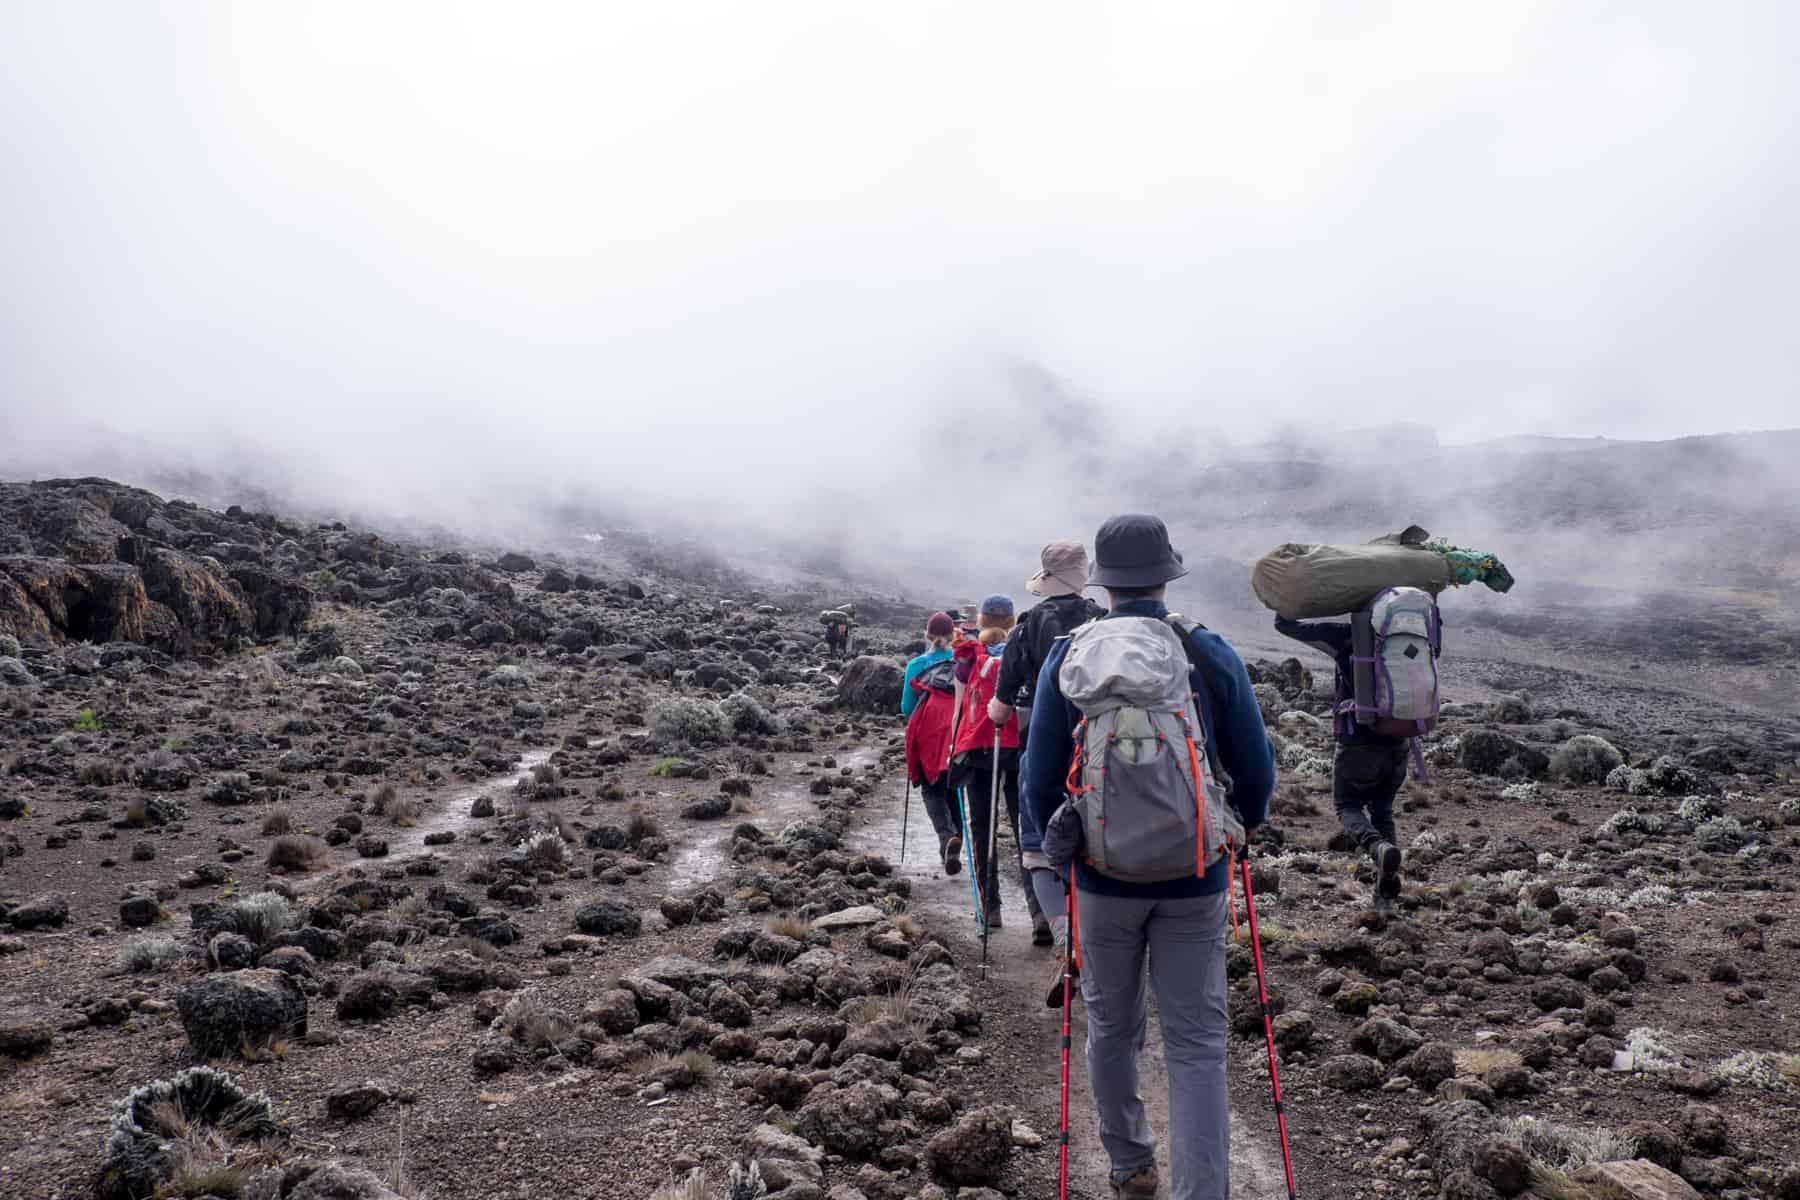 A porter on the right carrying a large, long bag, passes a group of trekkers to the right on a rocky, volcanic landscape of Mt. Kilimanjaro